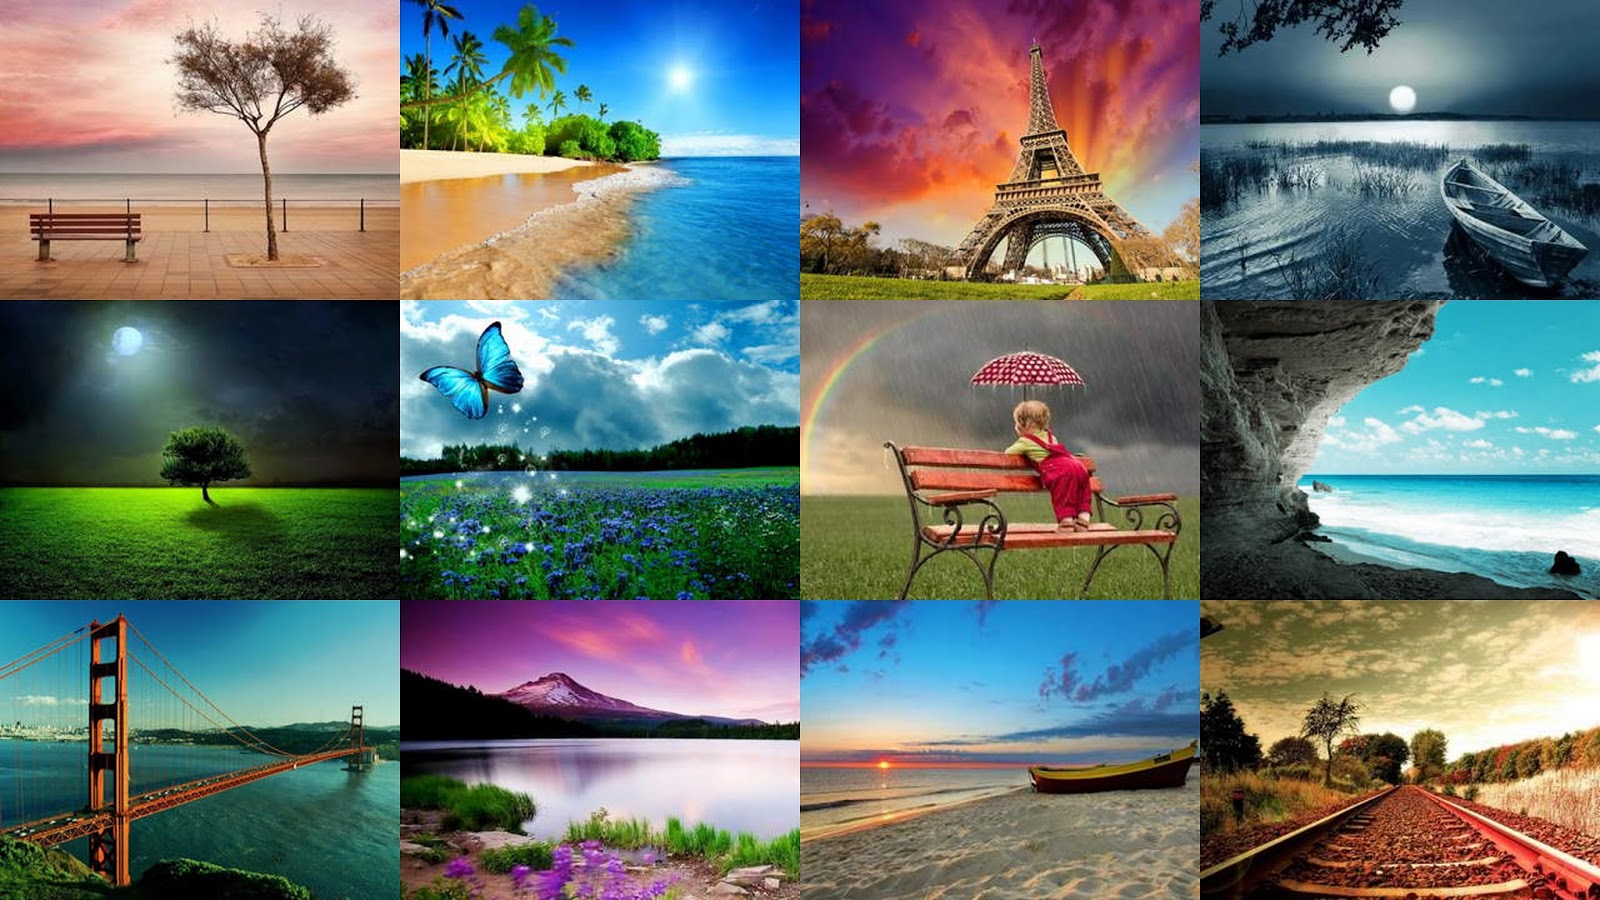 Nature Wallpaper Pack Contains HD Pics